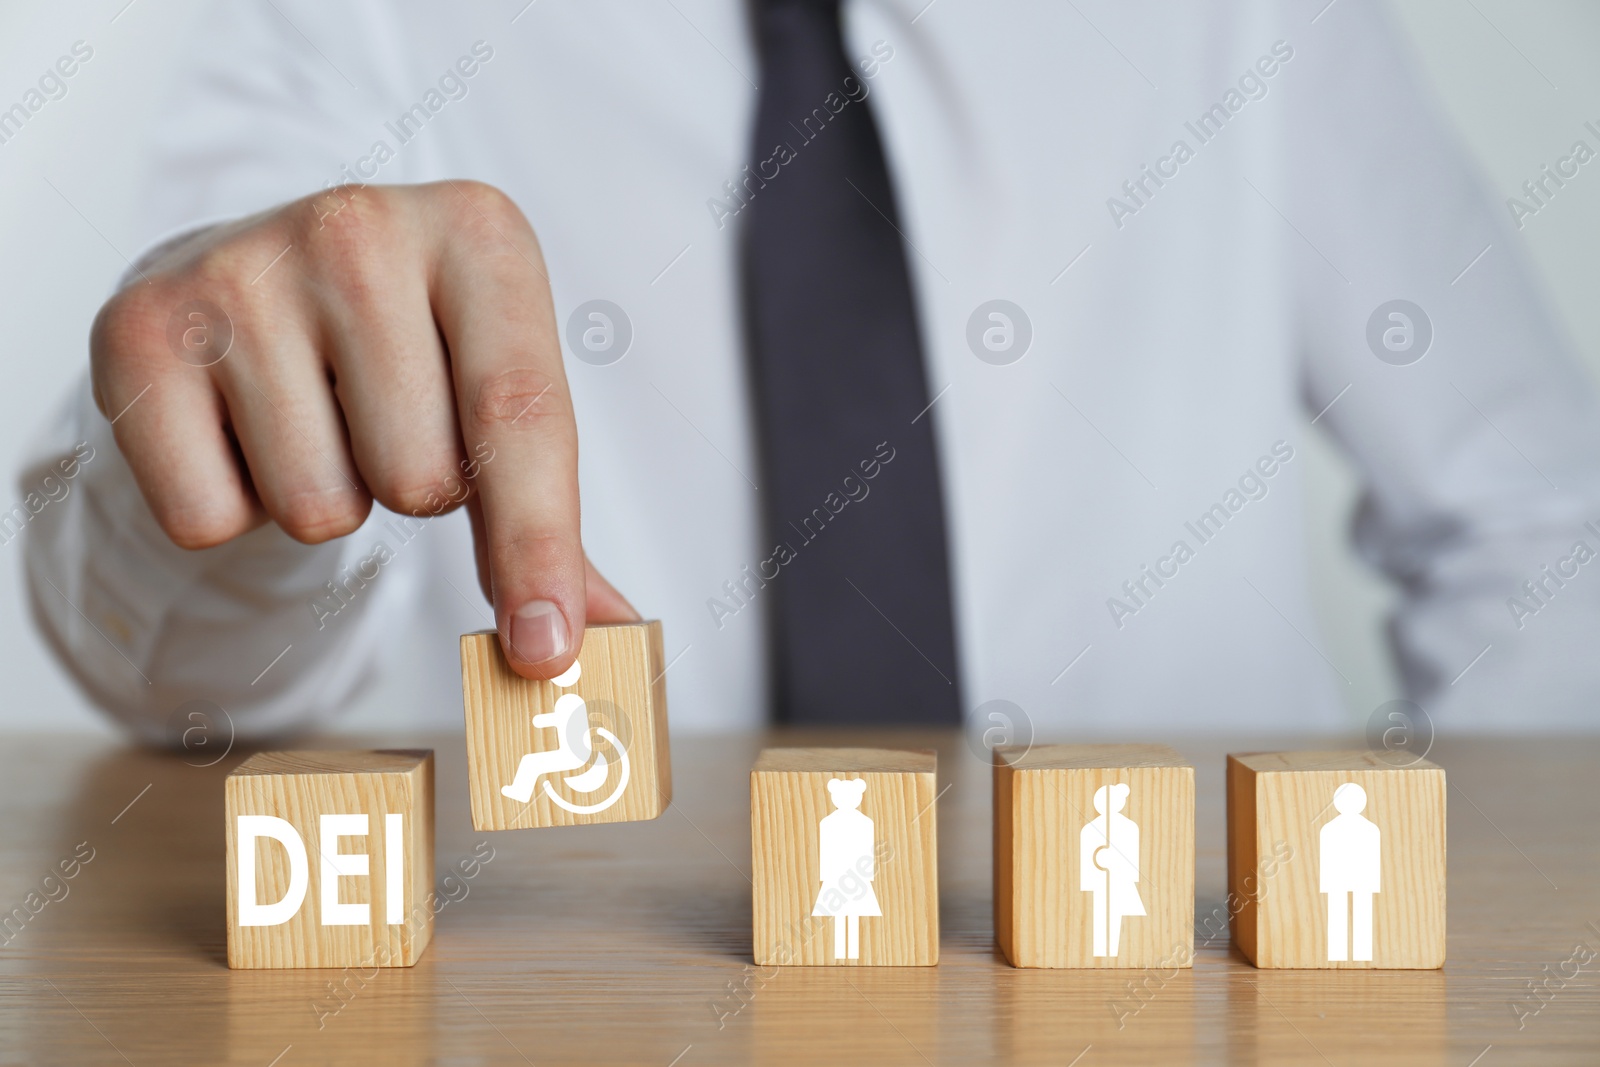 Image of Concept of DEI - Diversity, Equality, Inclusion. Businessman arranging wooden cubes with abbreviation and images of people on table, closeup